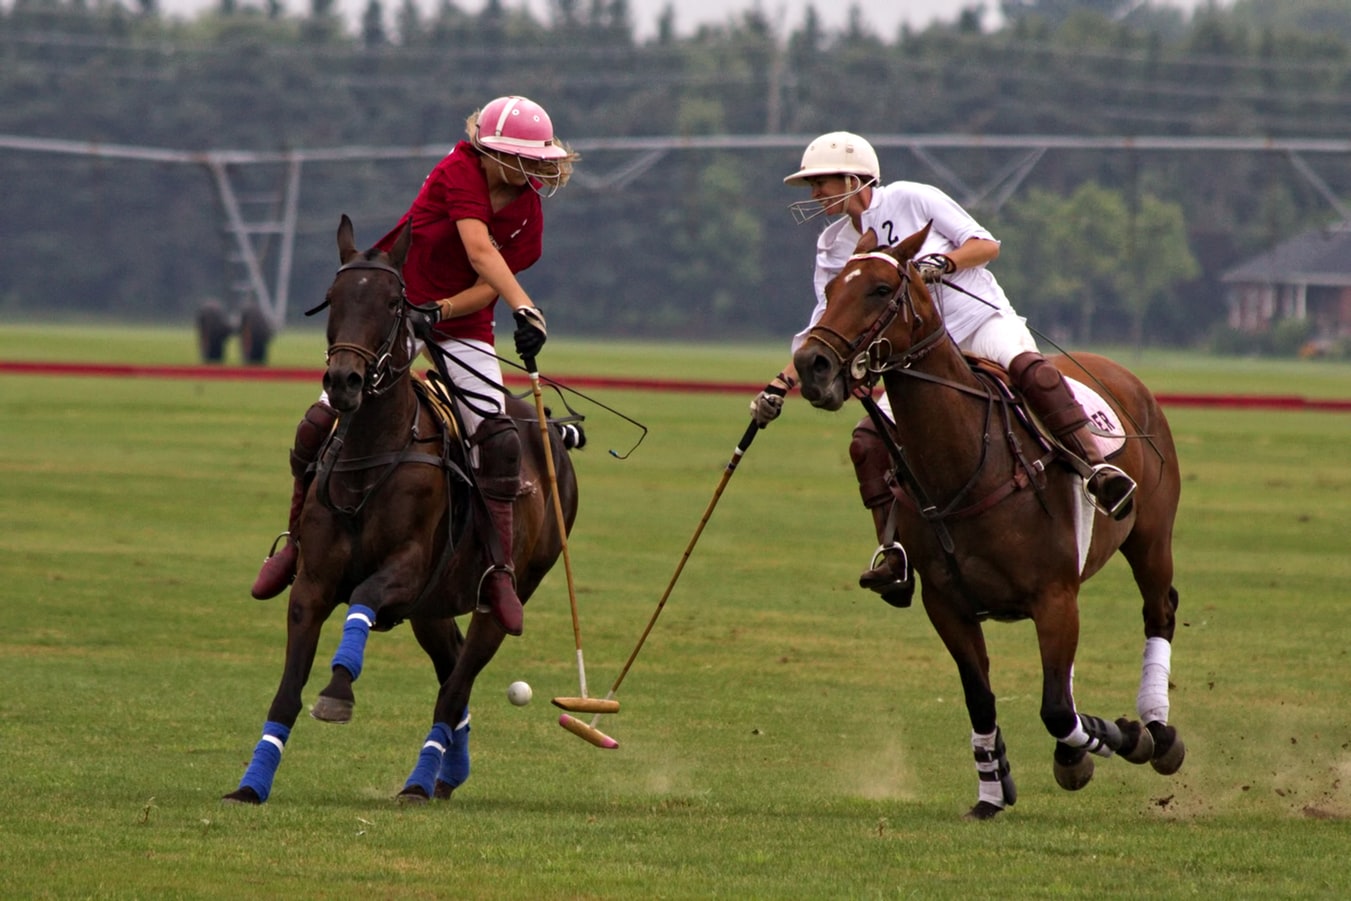 2 people on horses playing polo